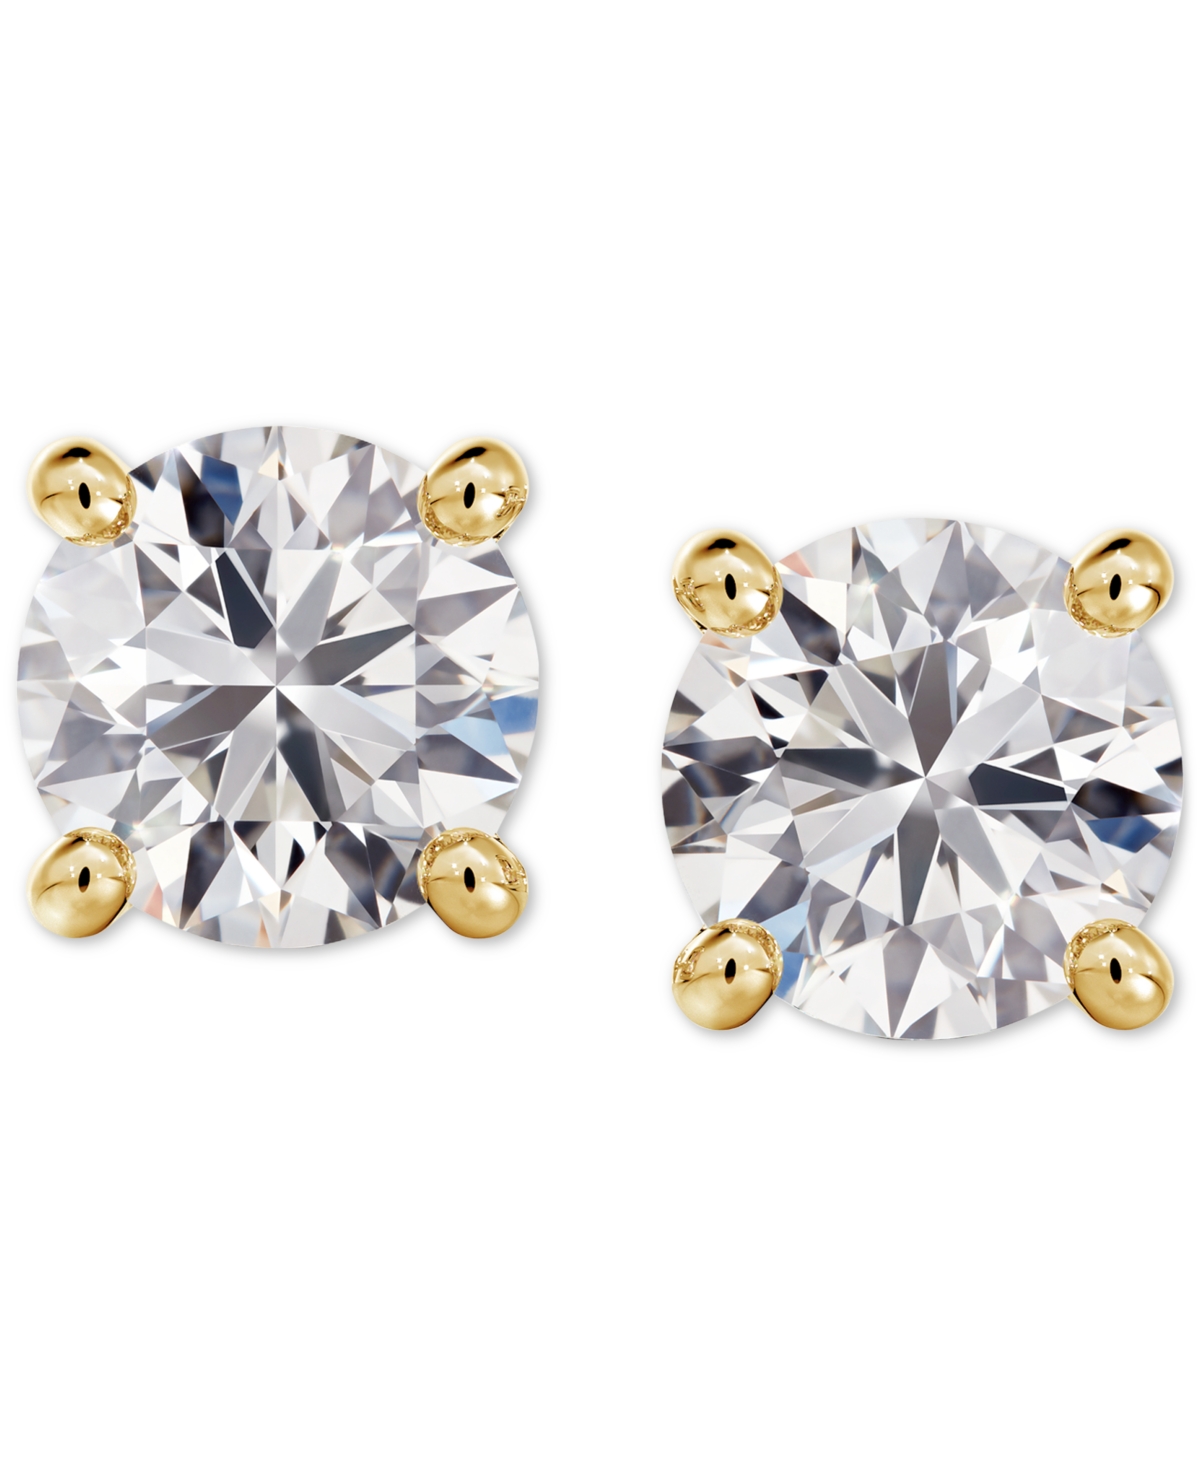 De Beers Forevermark Portfolio By  Diamond Stud Earrings (1/2 Ct. T.w.) In 14k White, Yellow Or Rose In Yellow Gold